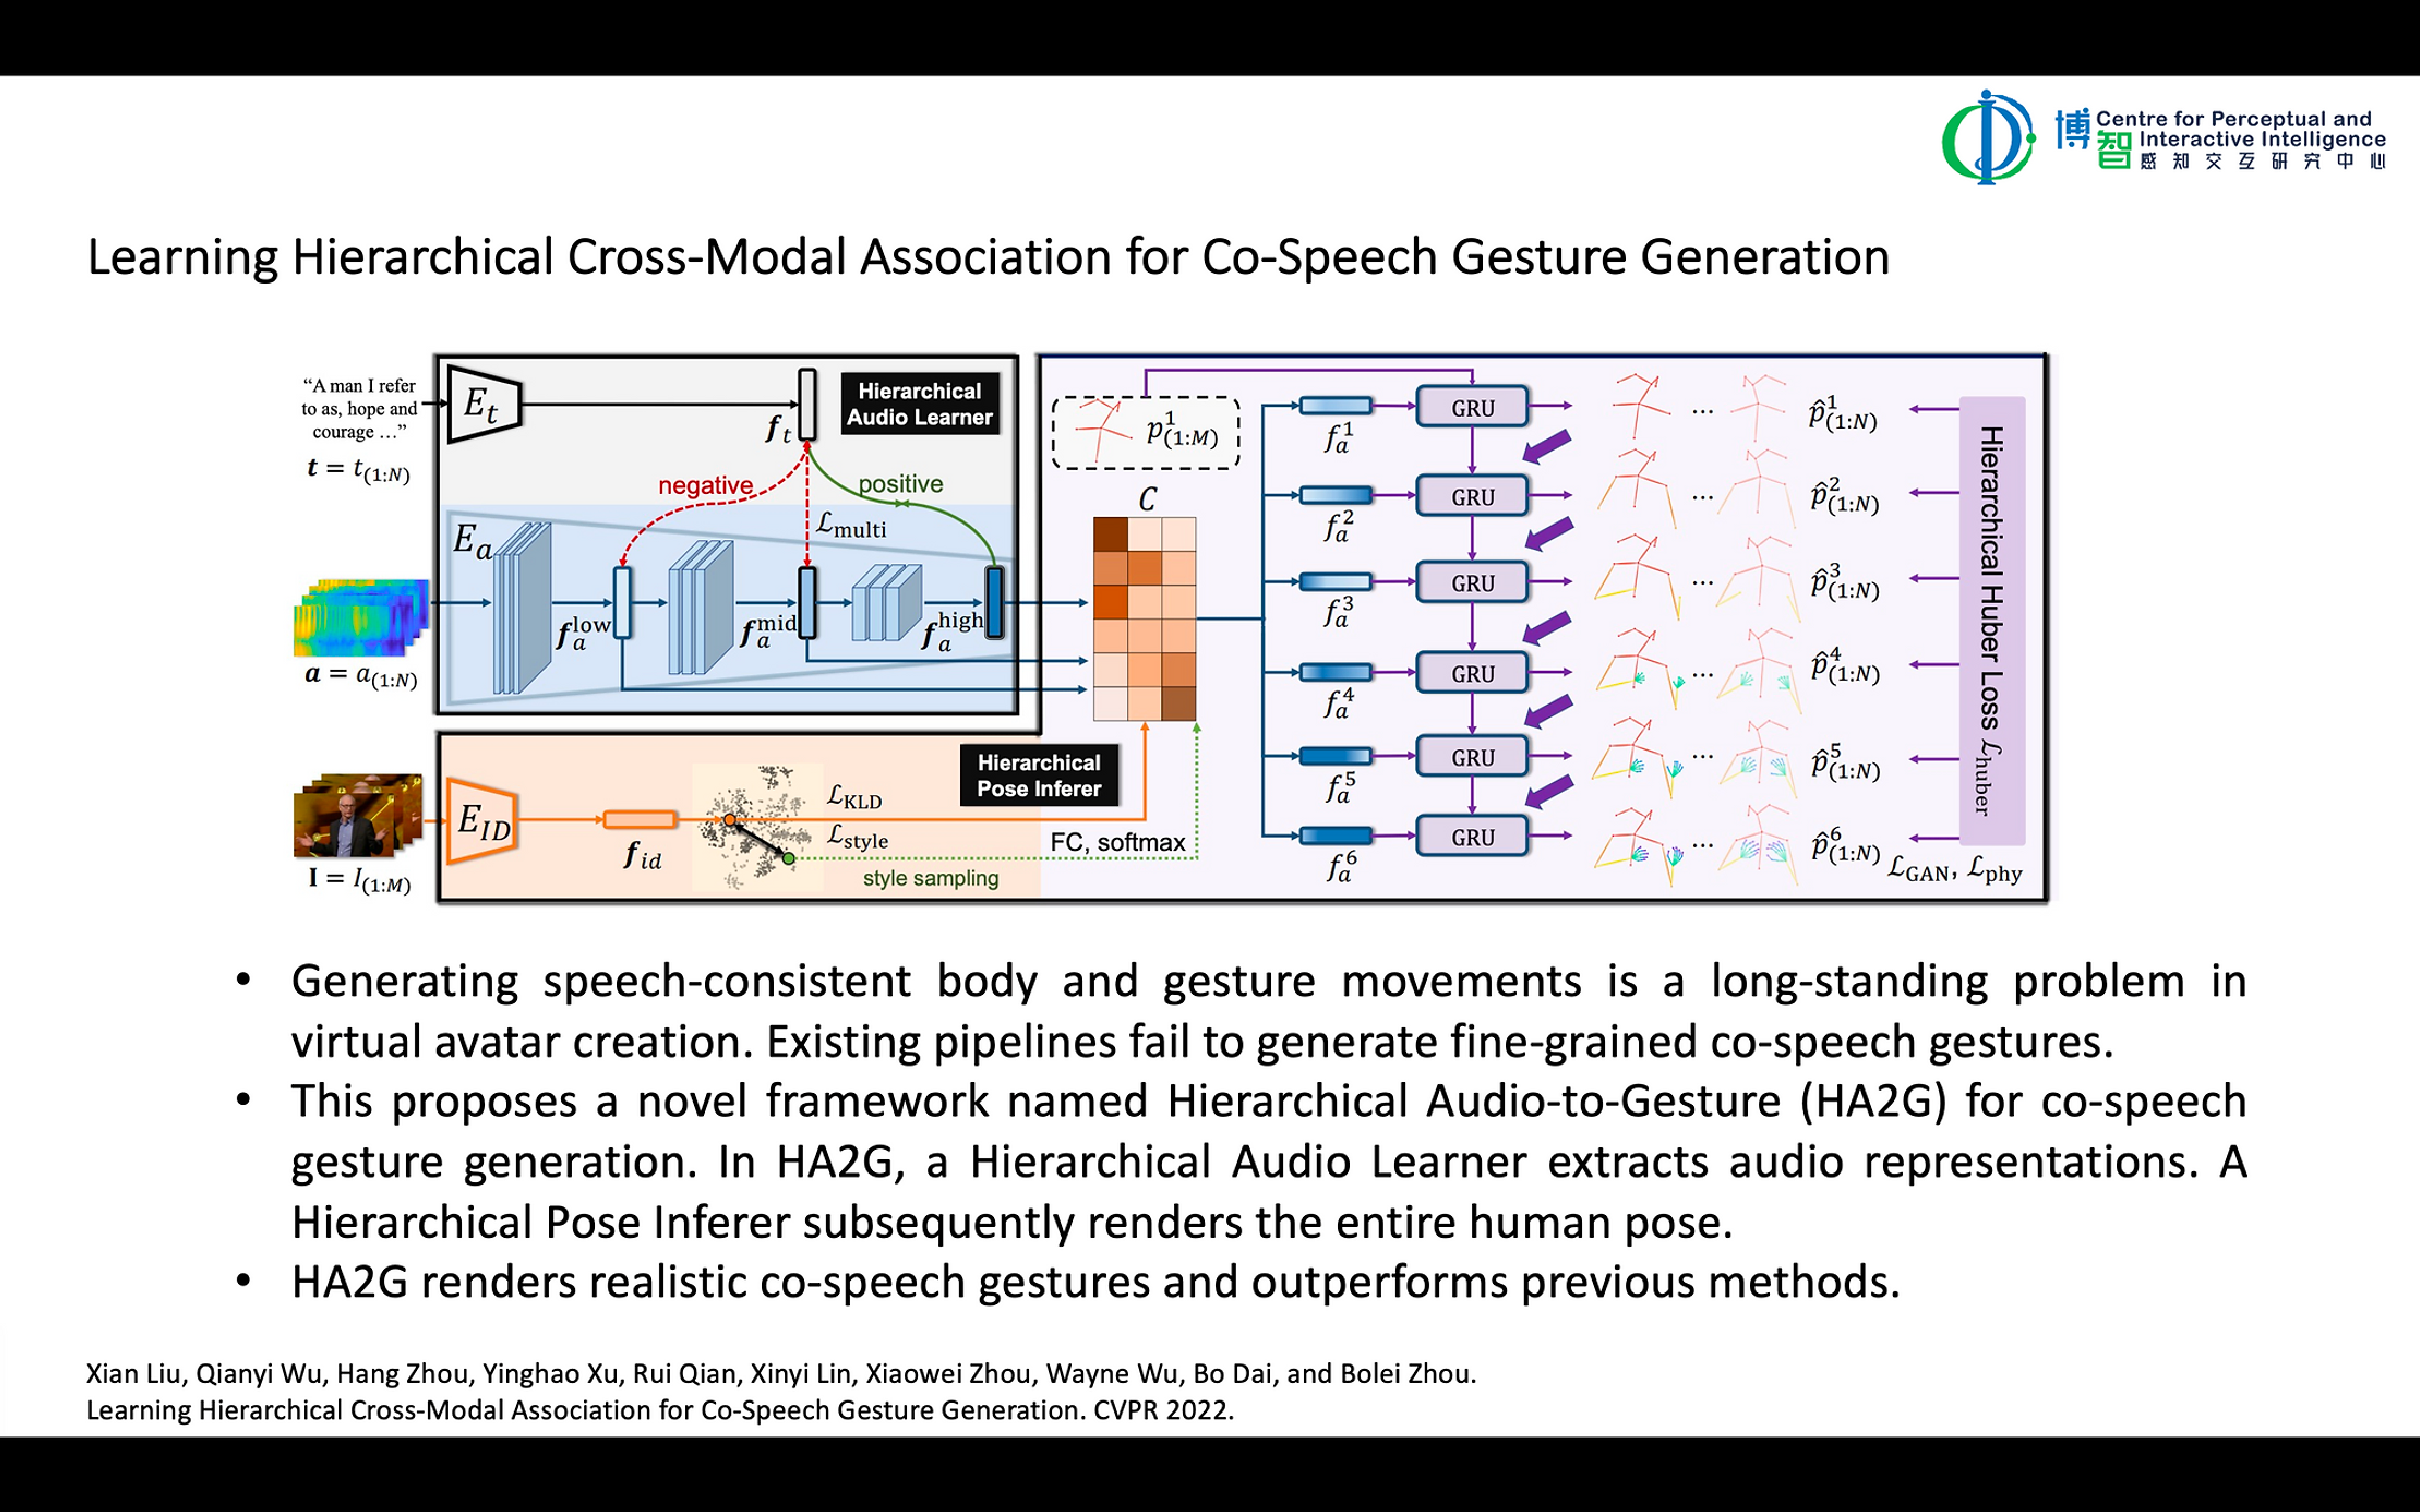 Learning Hierarchical Cross-Modal Association for Co-speech Gesture Generation